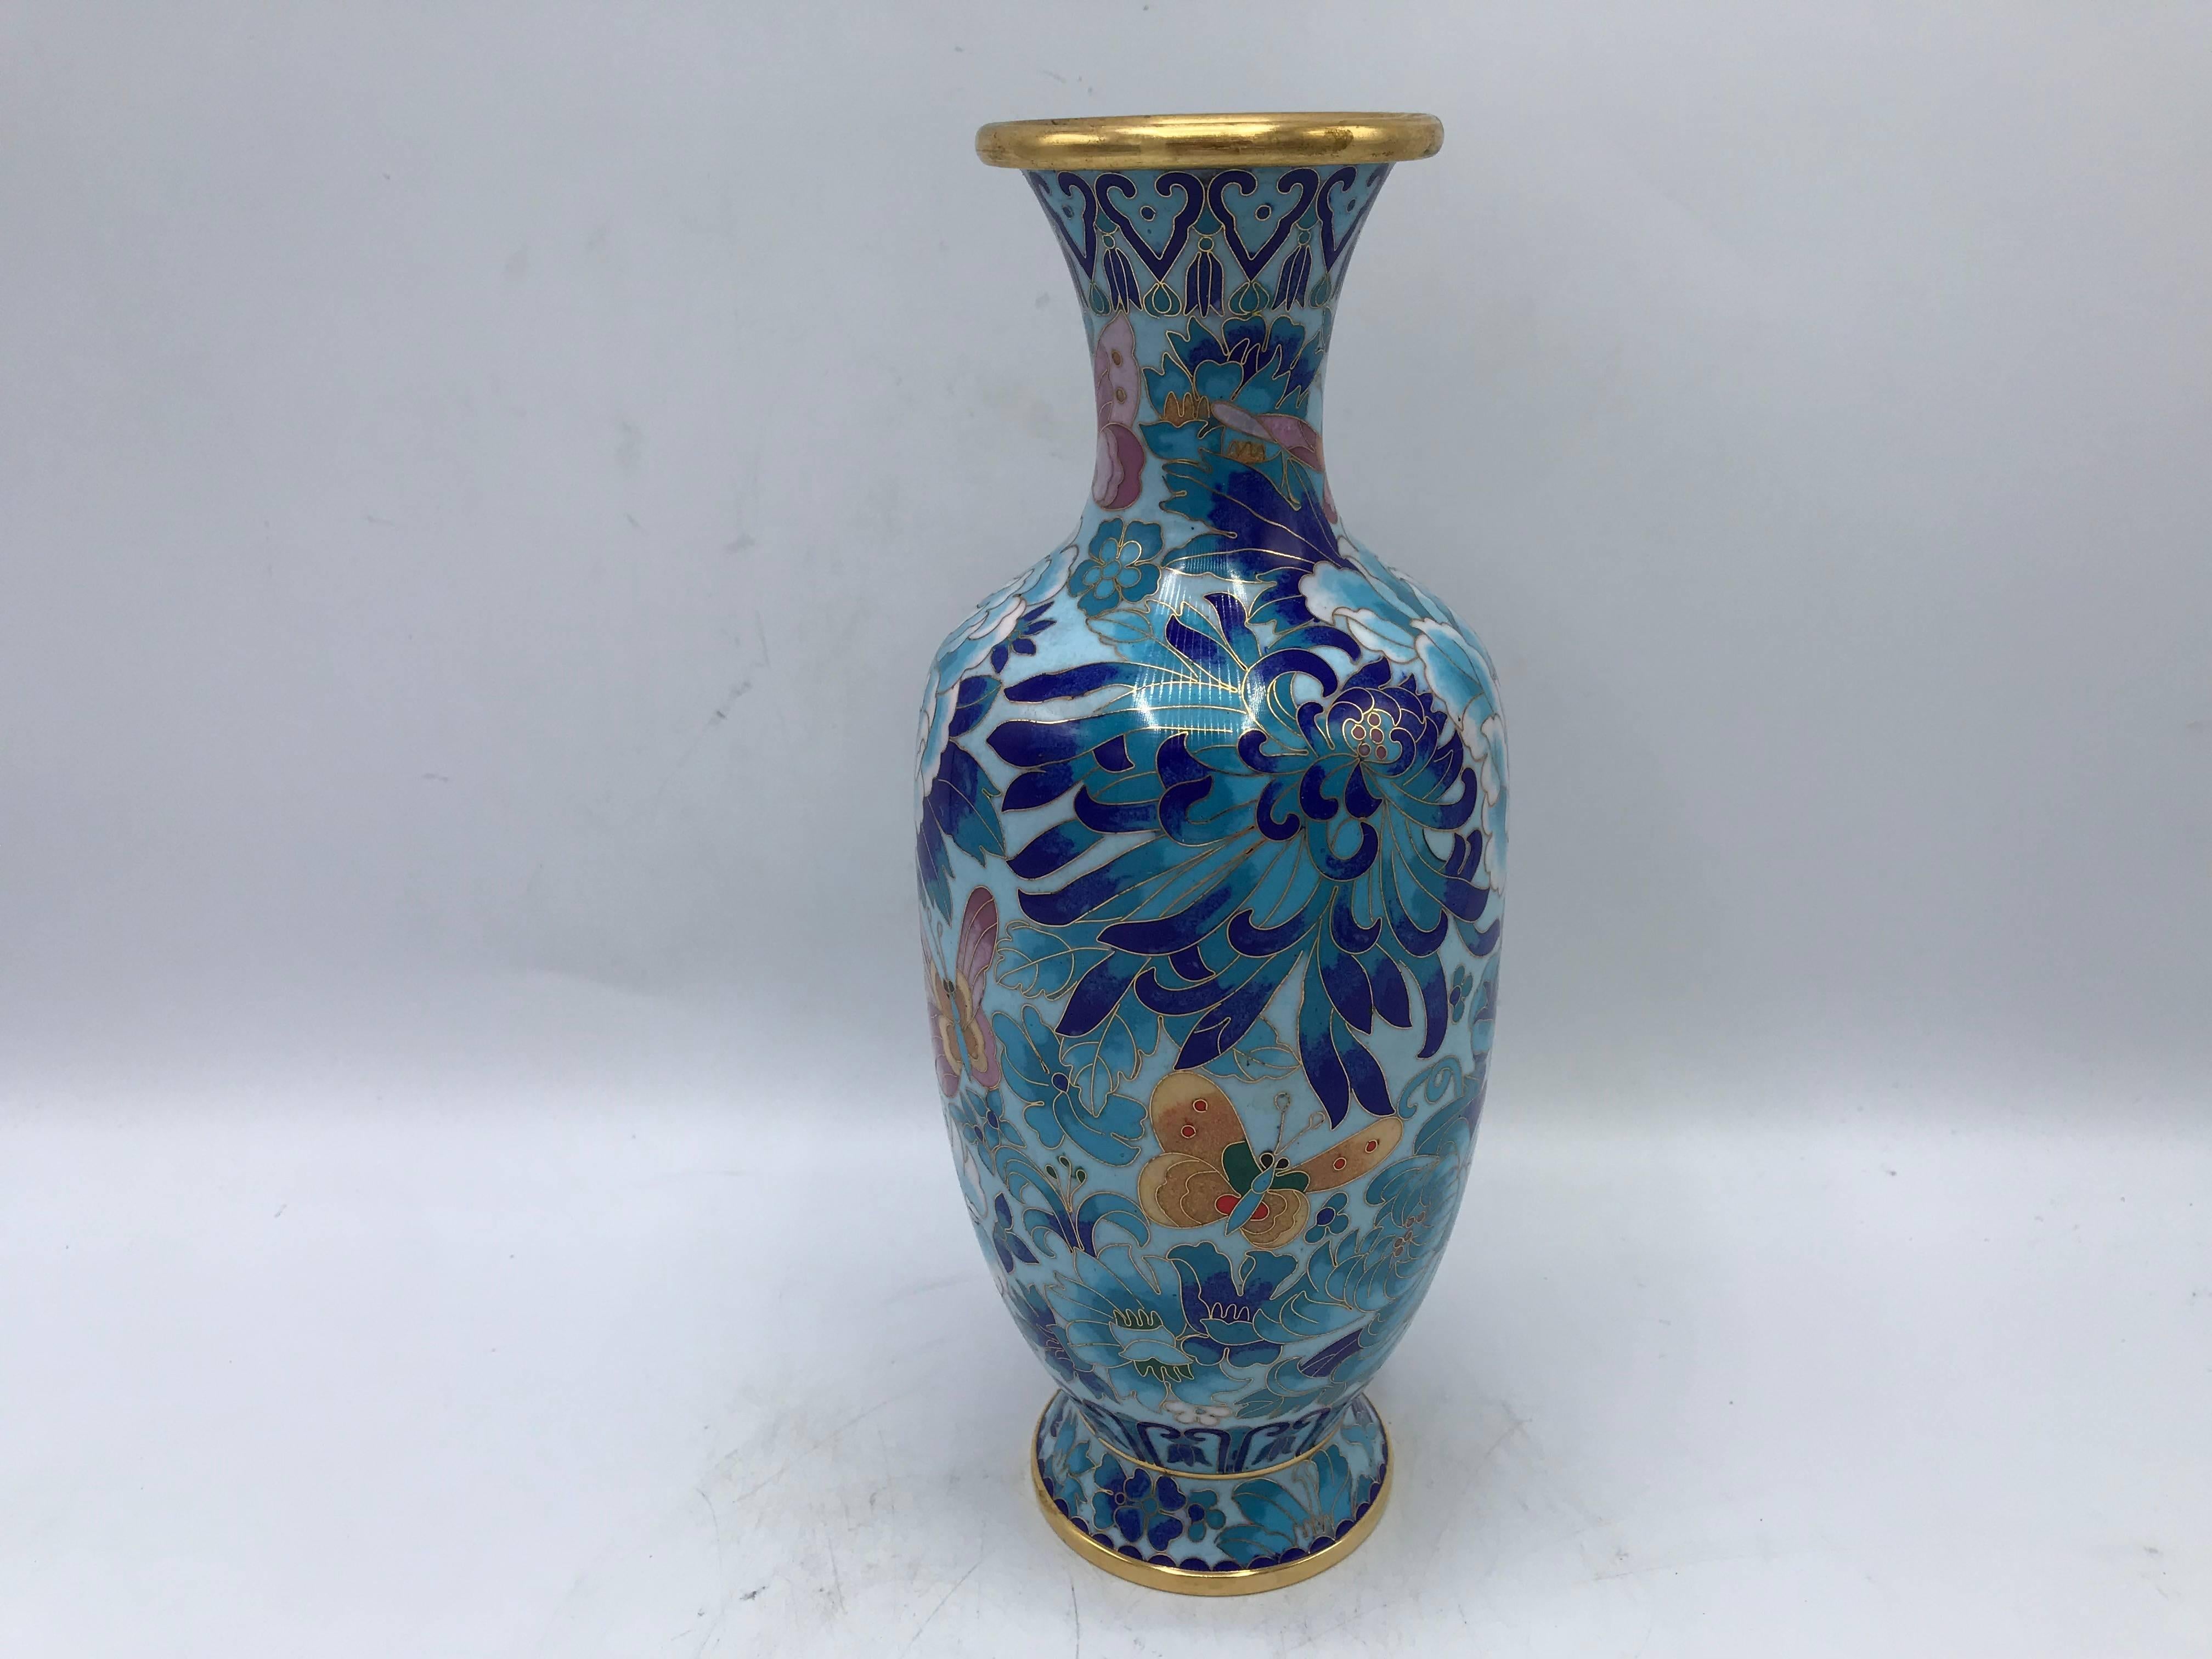 Listed is a stunning, 1960s cloisonné vase. The piece has gorgeous shades of blue, complimenting the all-over peony and floral motif.